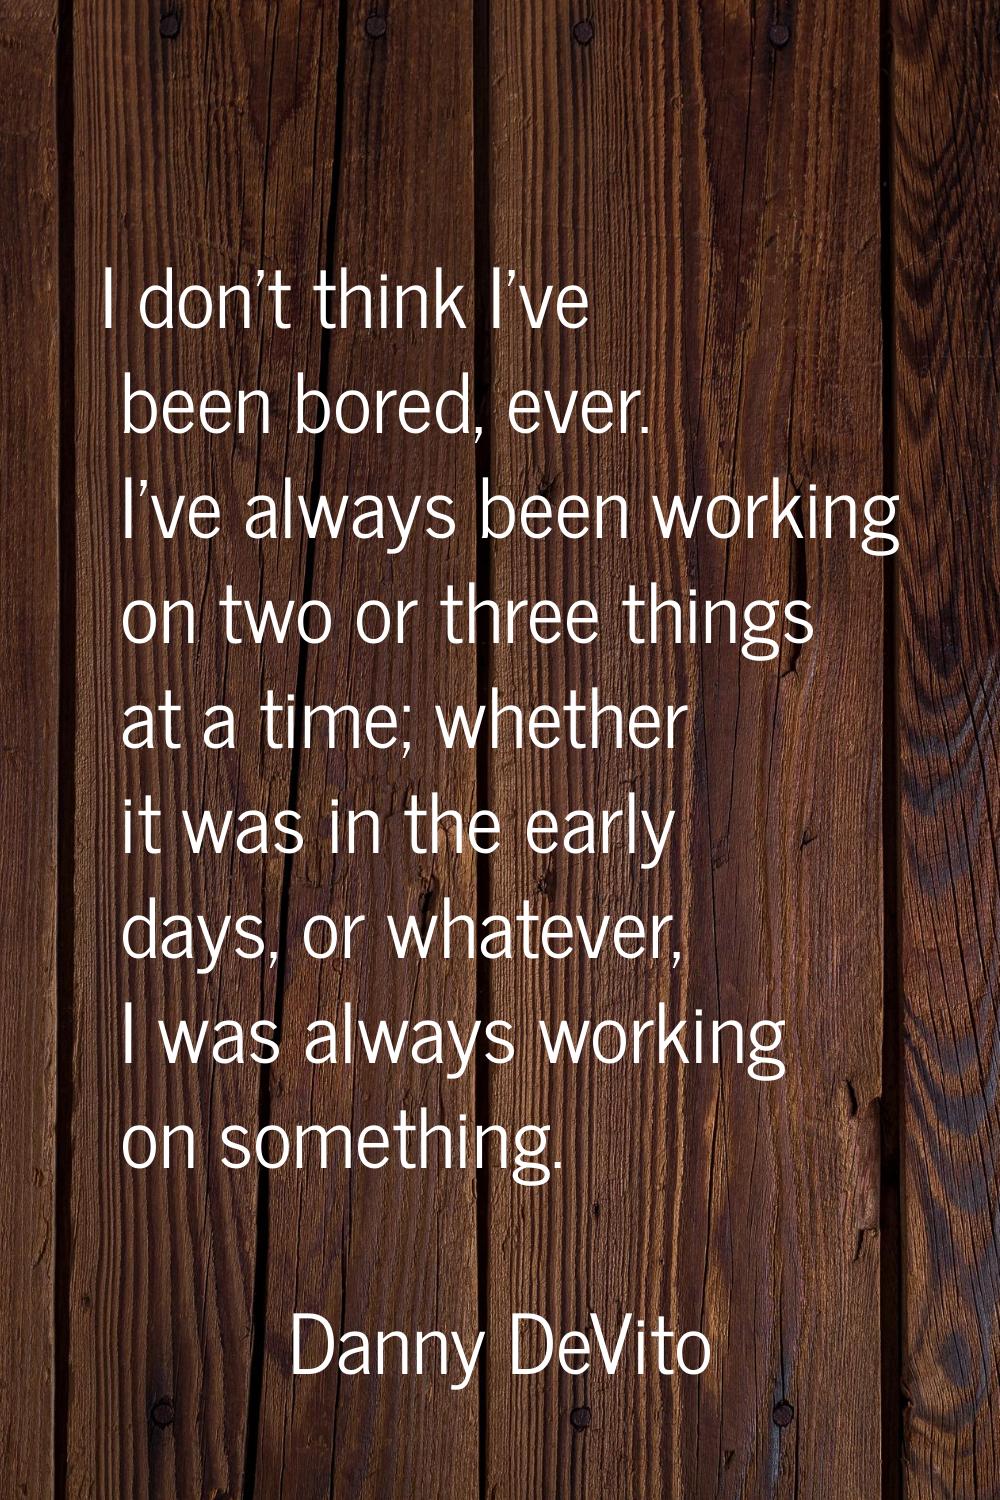 I don't think I've been bored, ever. I've always been working on two or three things at a time; whe